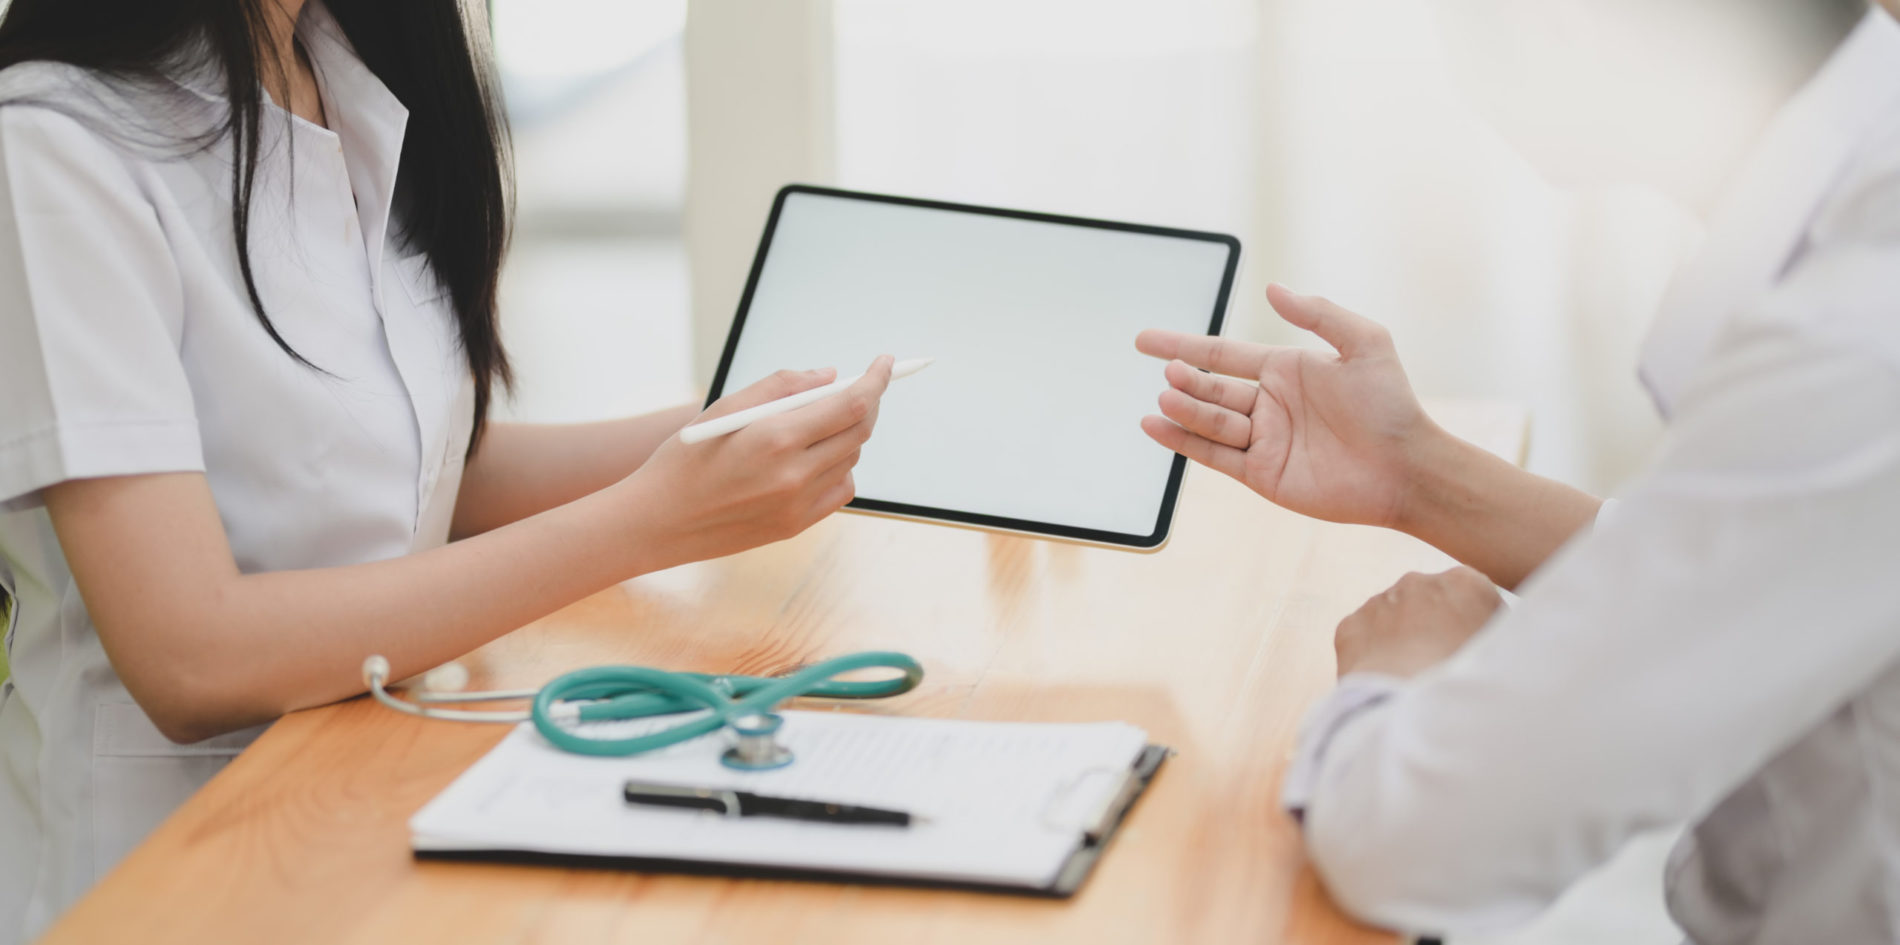 2 healthcare workers looking at a chart with a stethoscope on the table